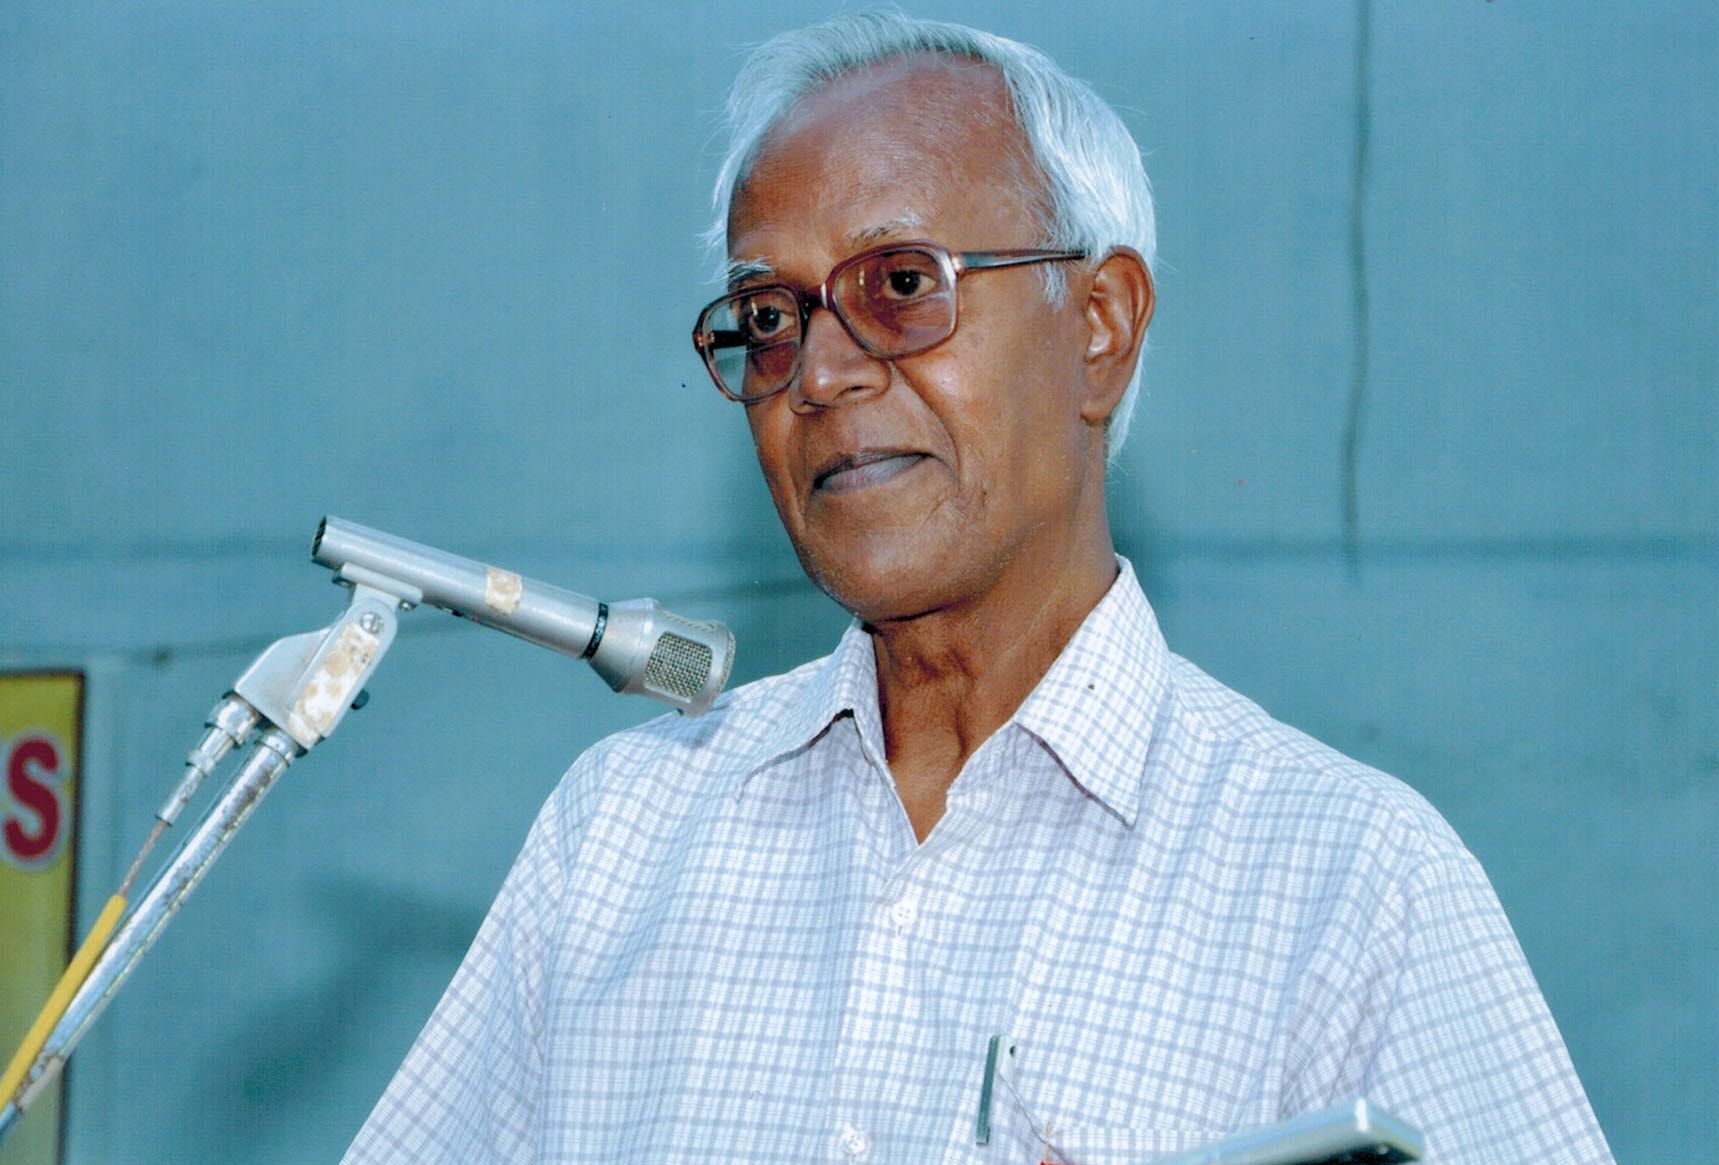 Fr Stan Swamy stands at a microphone